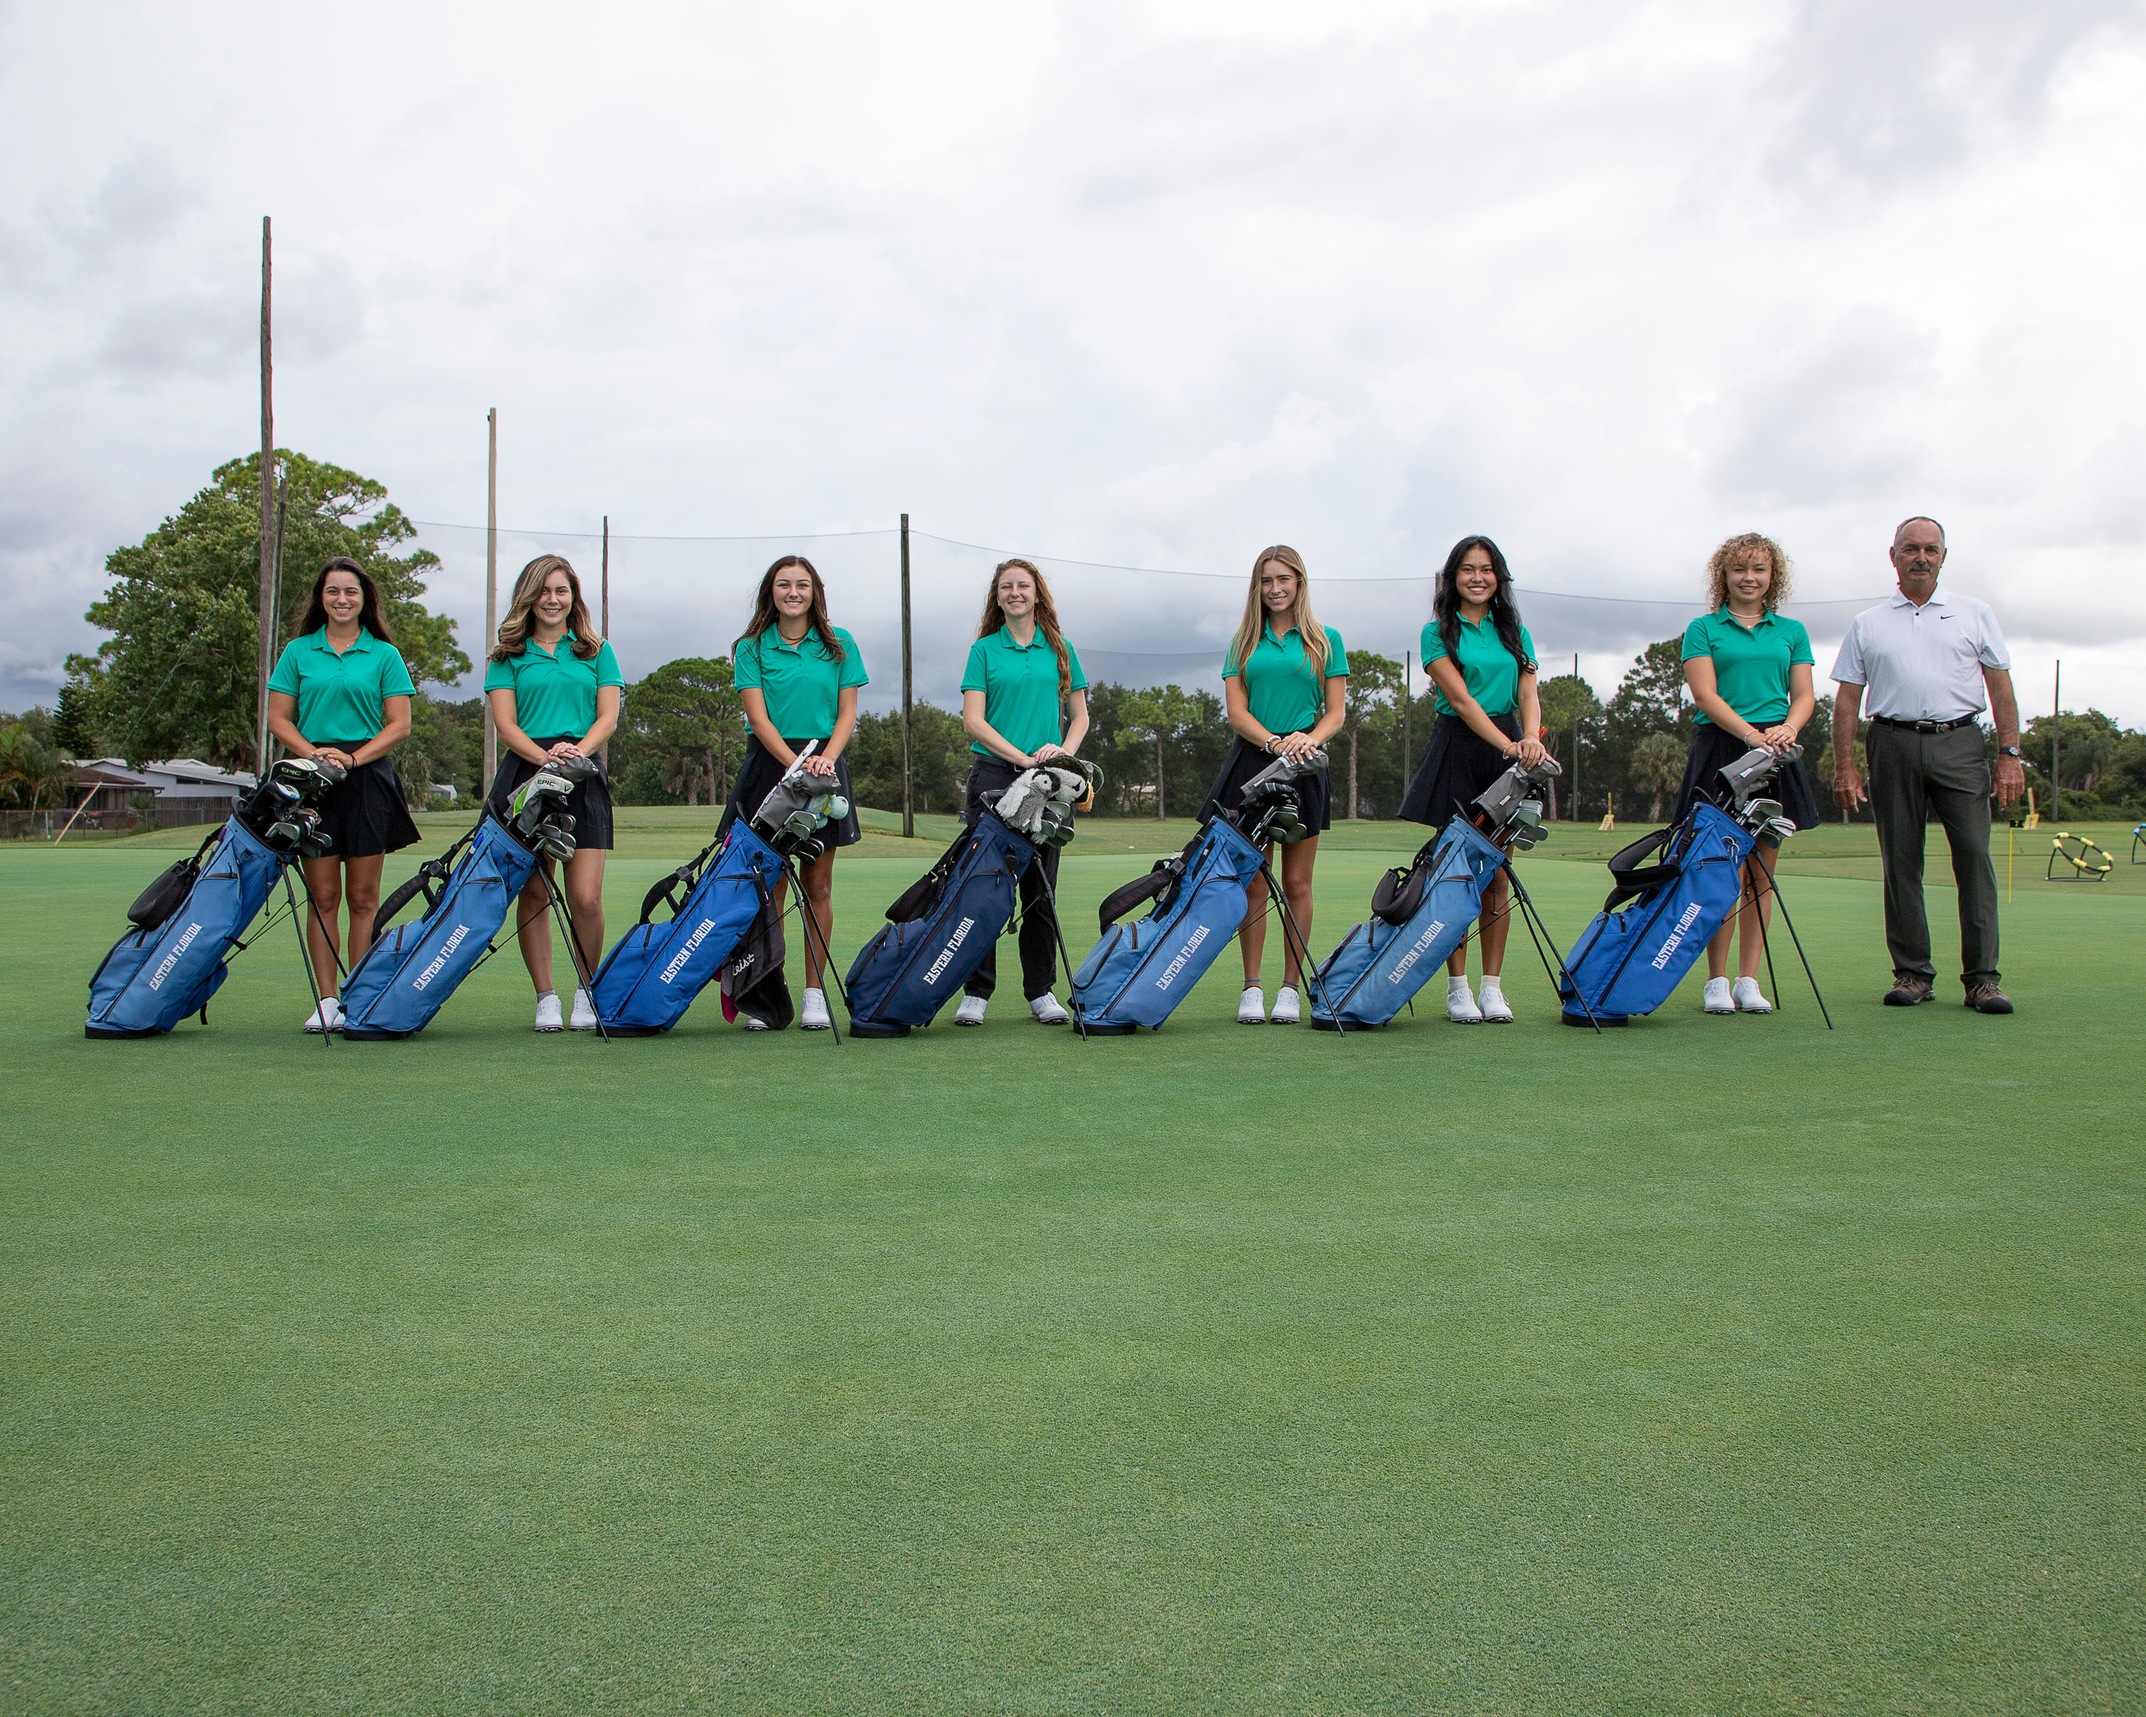 Women's golf team set to compete in national tournament